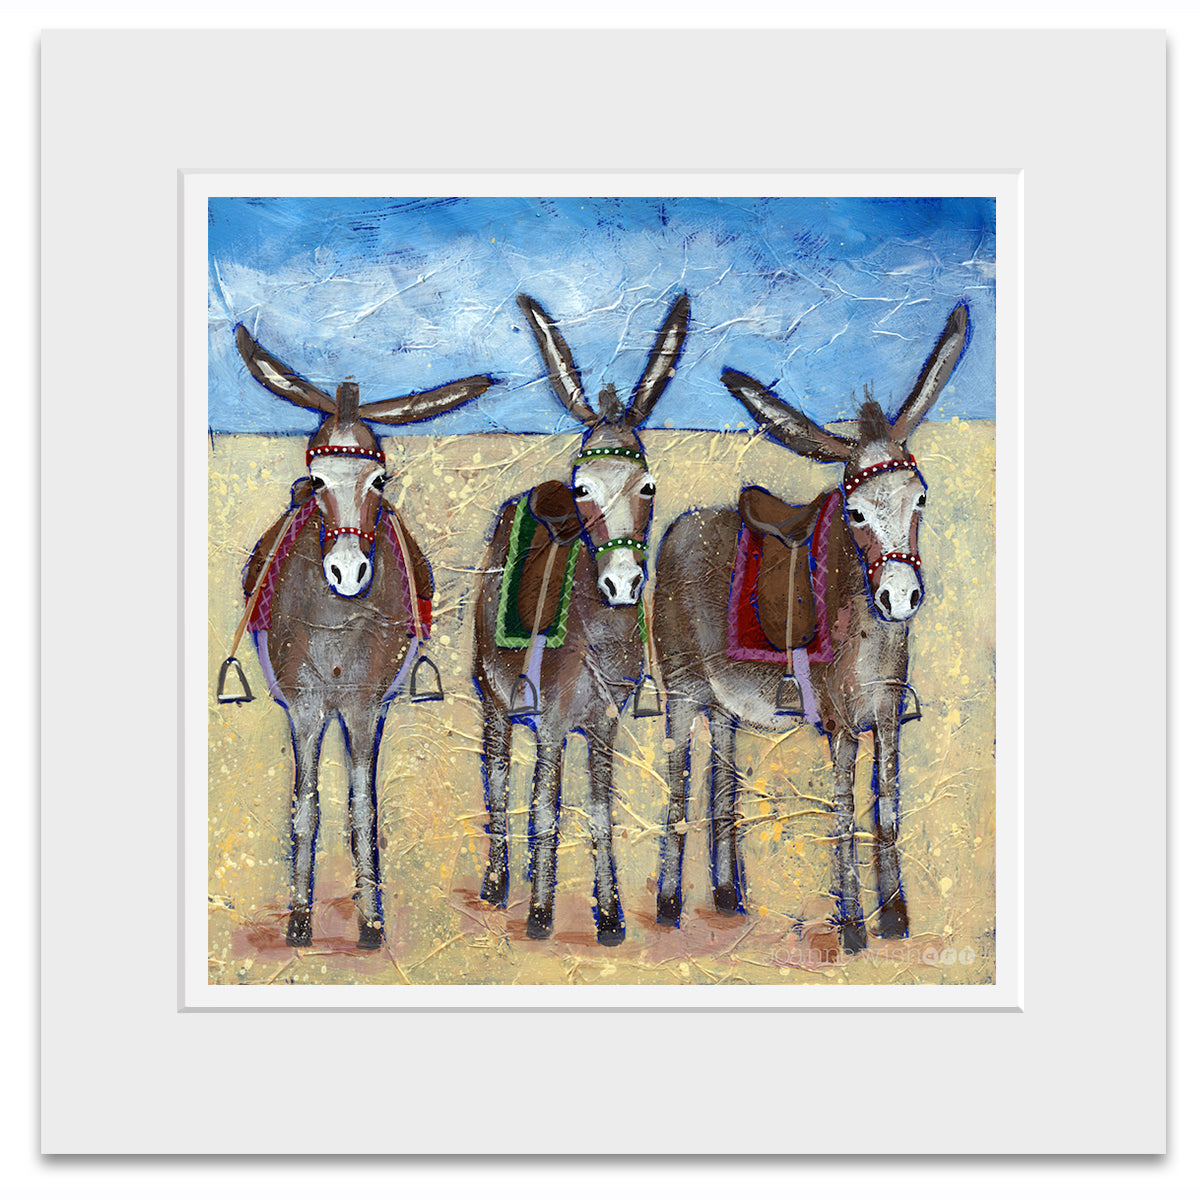 A mounted print of three cute donkeys lined up in row on the beach.